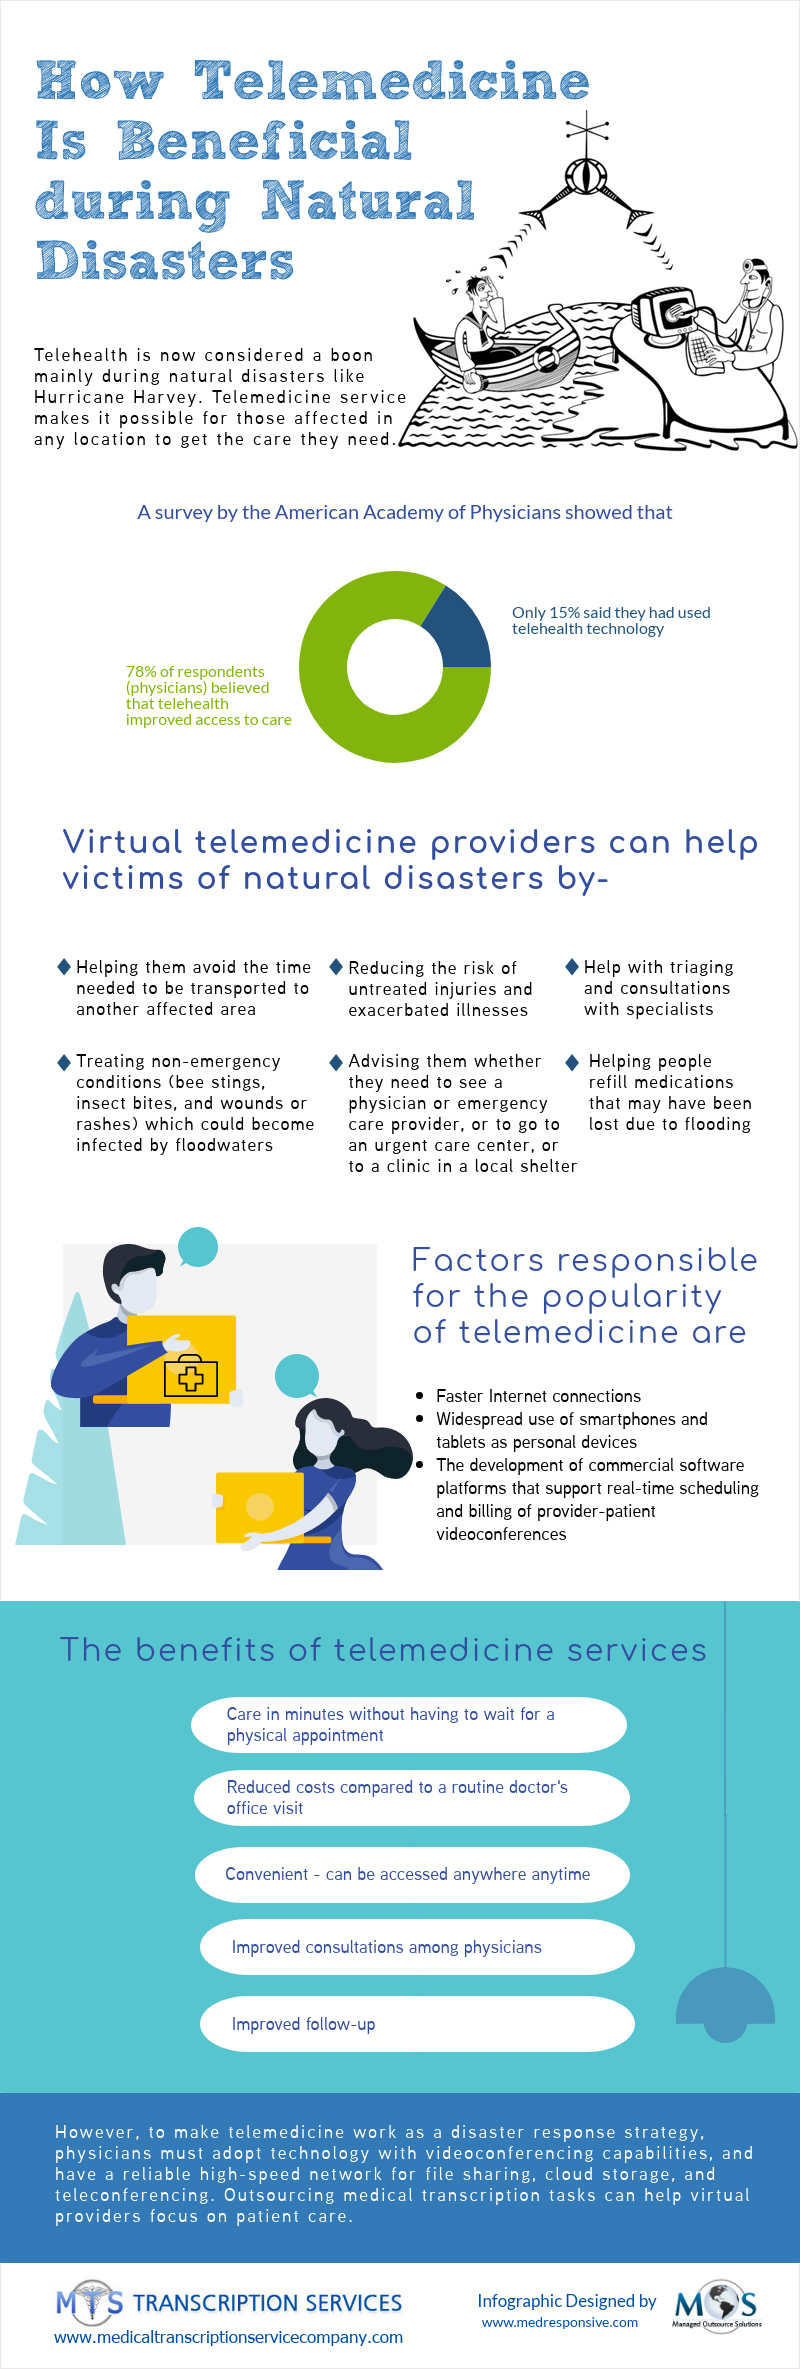 telemedicine-is-beneficial-during-natural-disasters